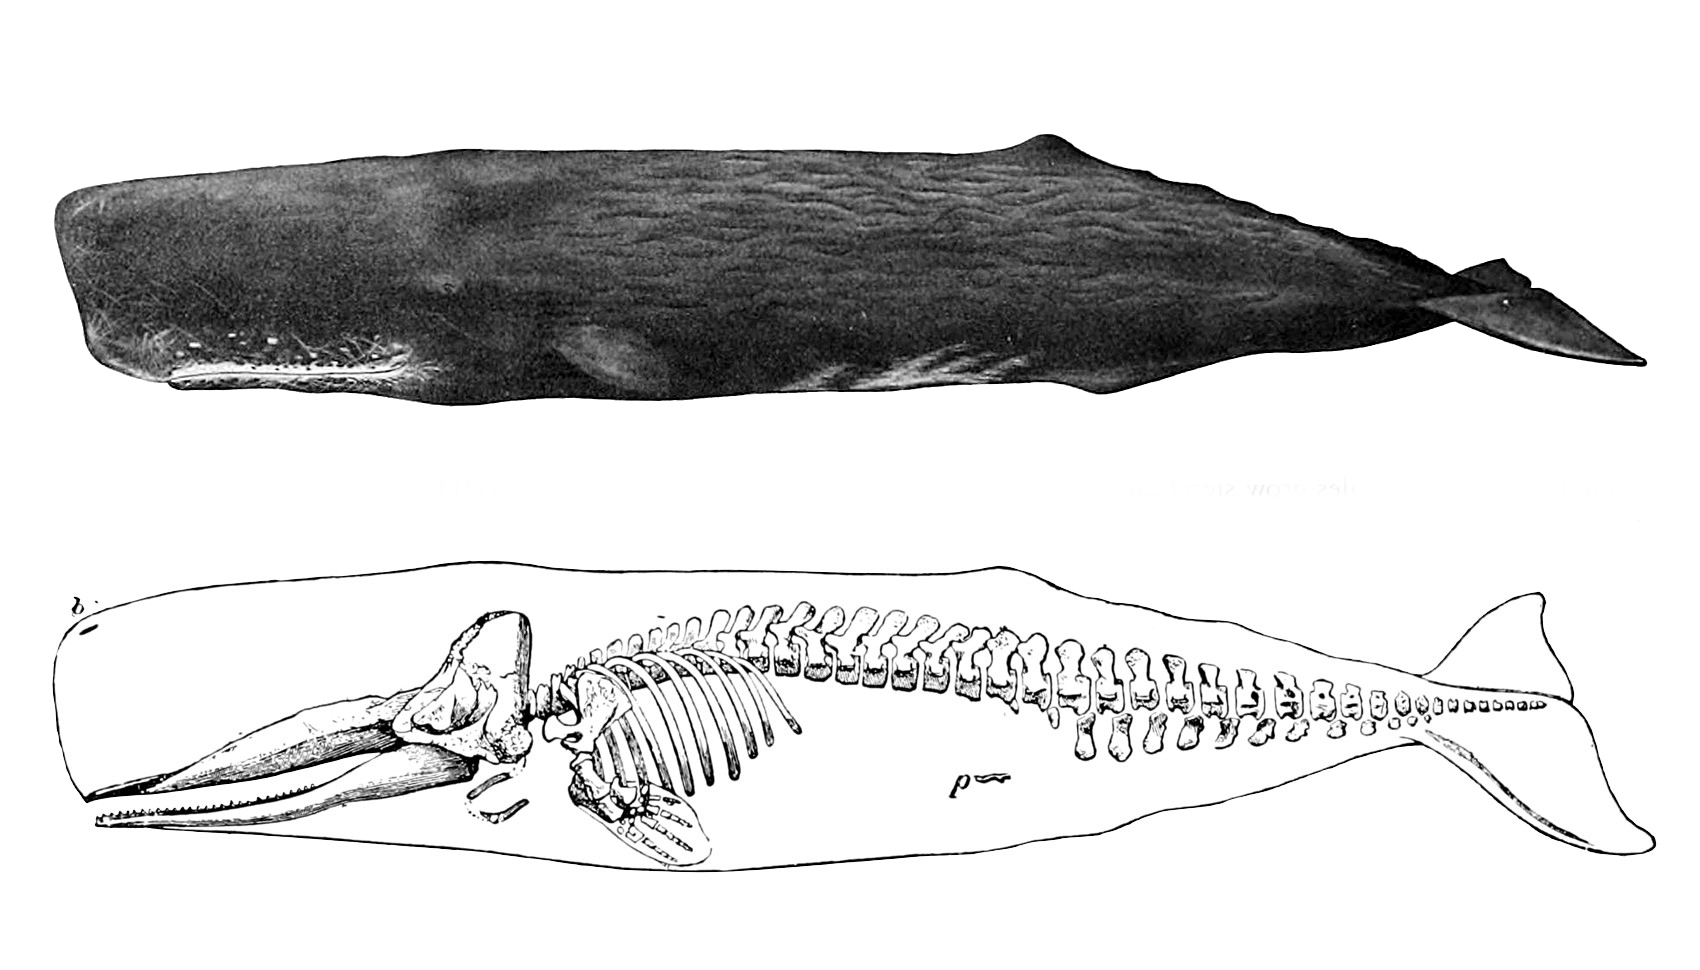 Sperm_whale_drawing_with_skeleton.jpg